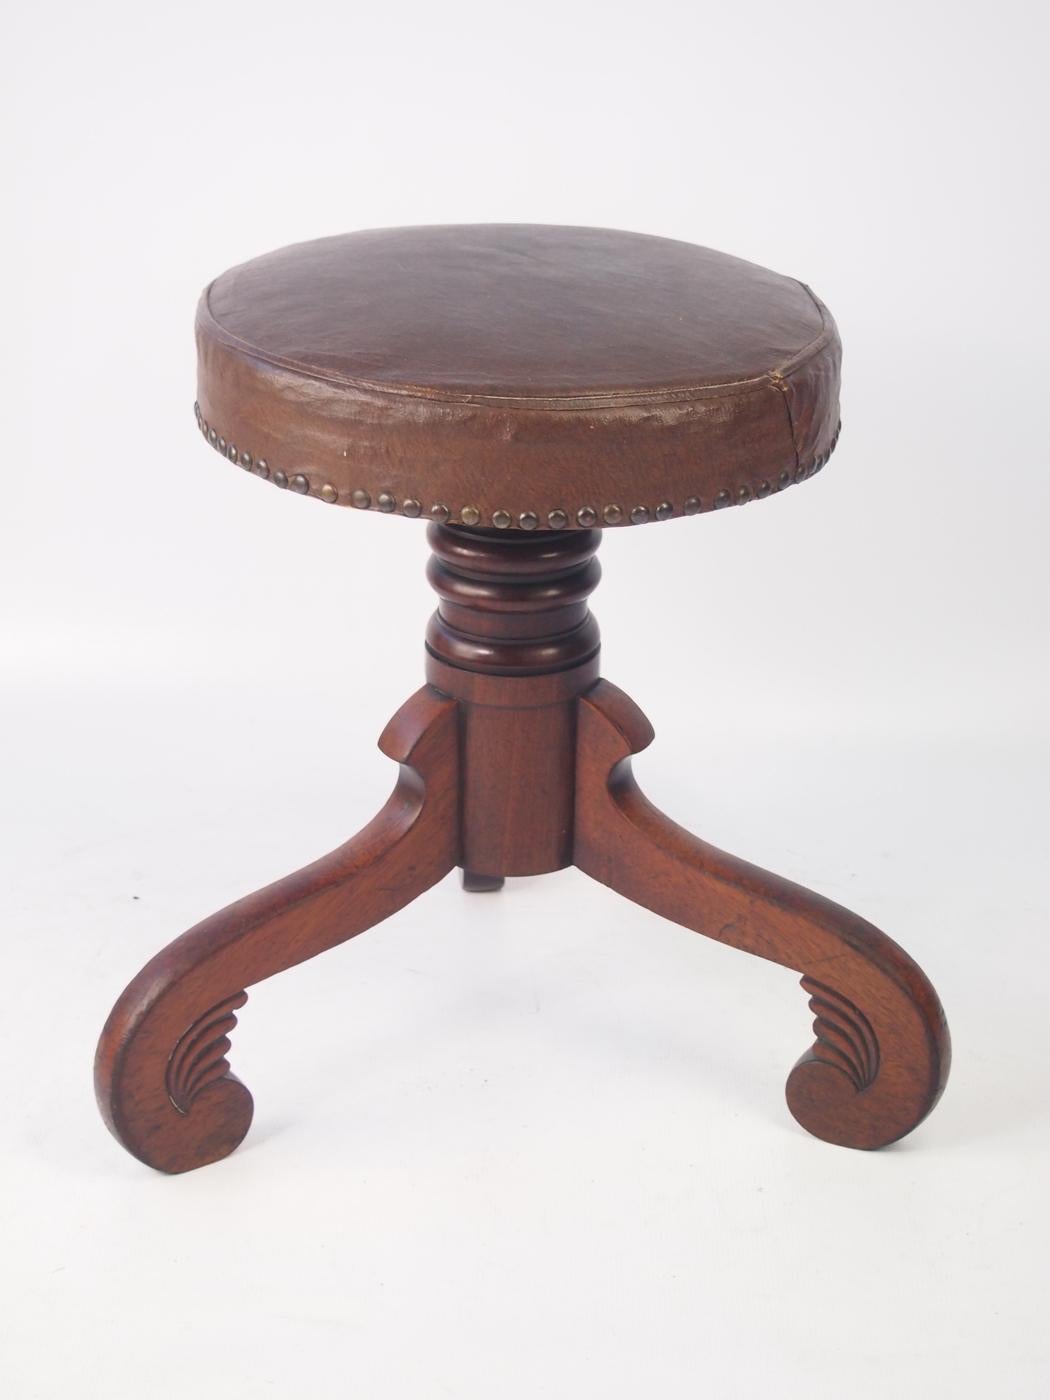 Antique English Victorian Mahogany Rise and Fall Piano Stool Regency Music Chair In Good Condition For Sale In Leeds, West Yorkshire